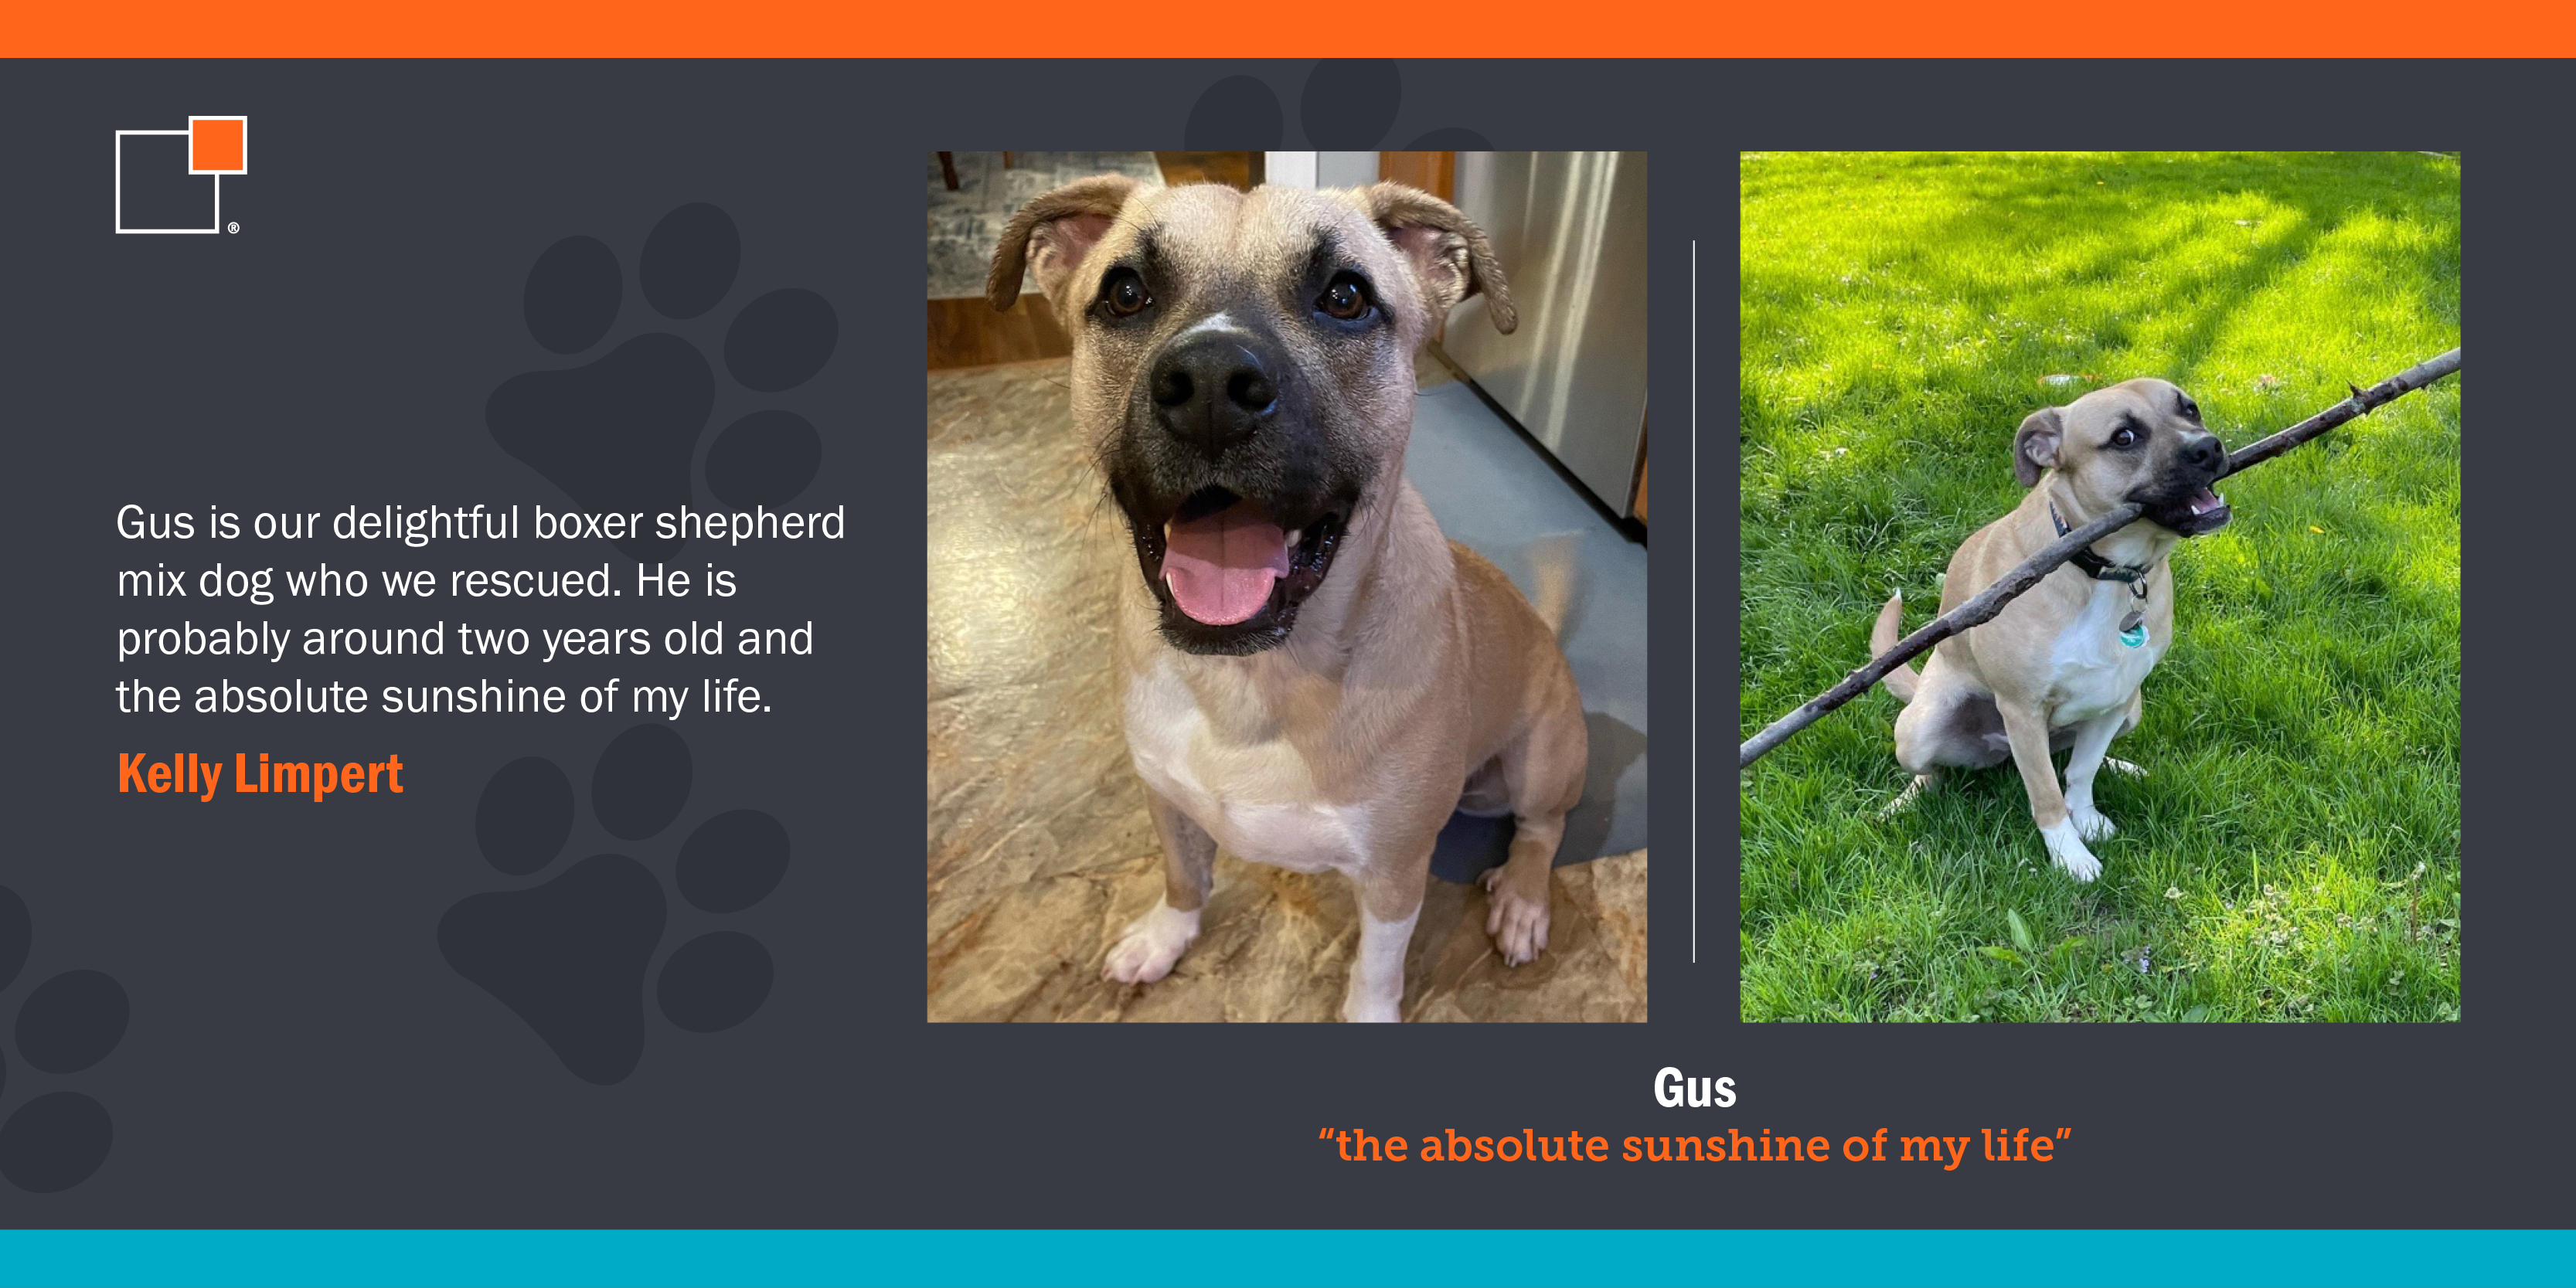 Photos of Gus the dog, "the absolute sunshine of my life"